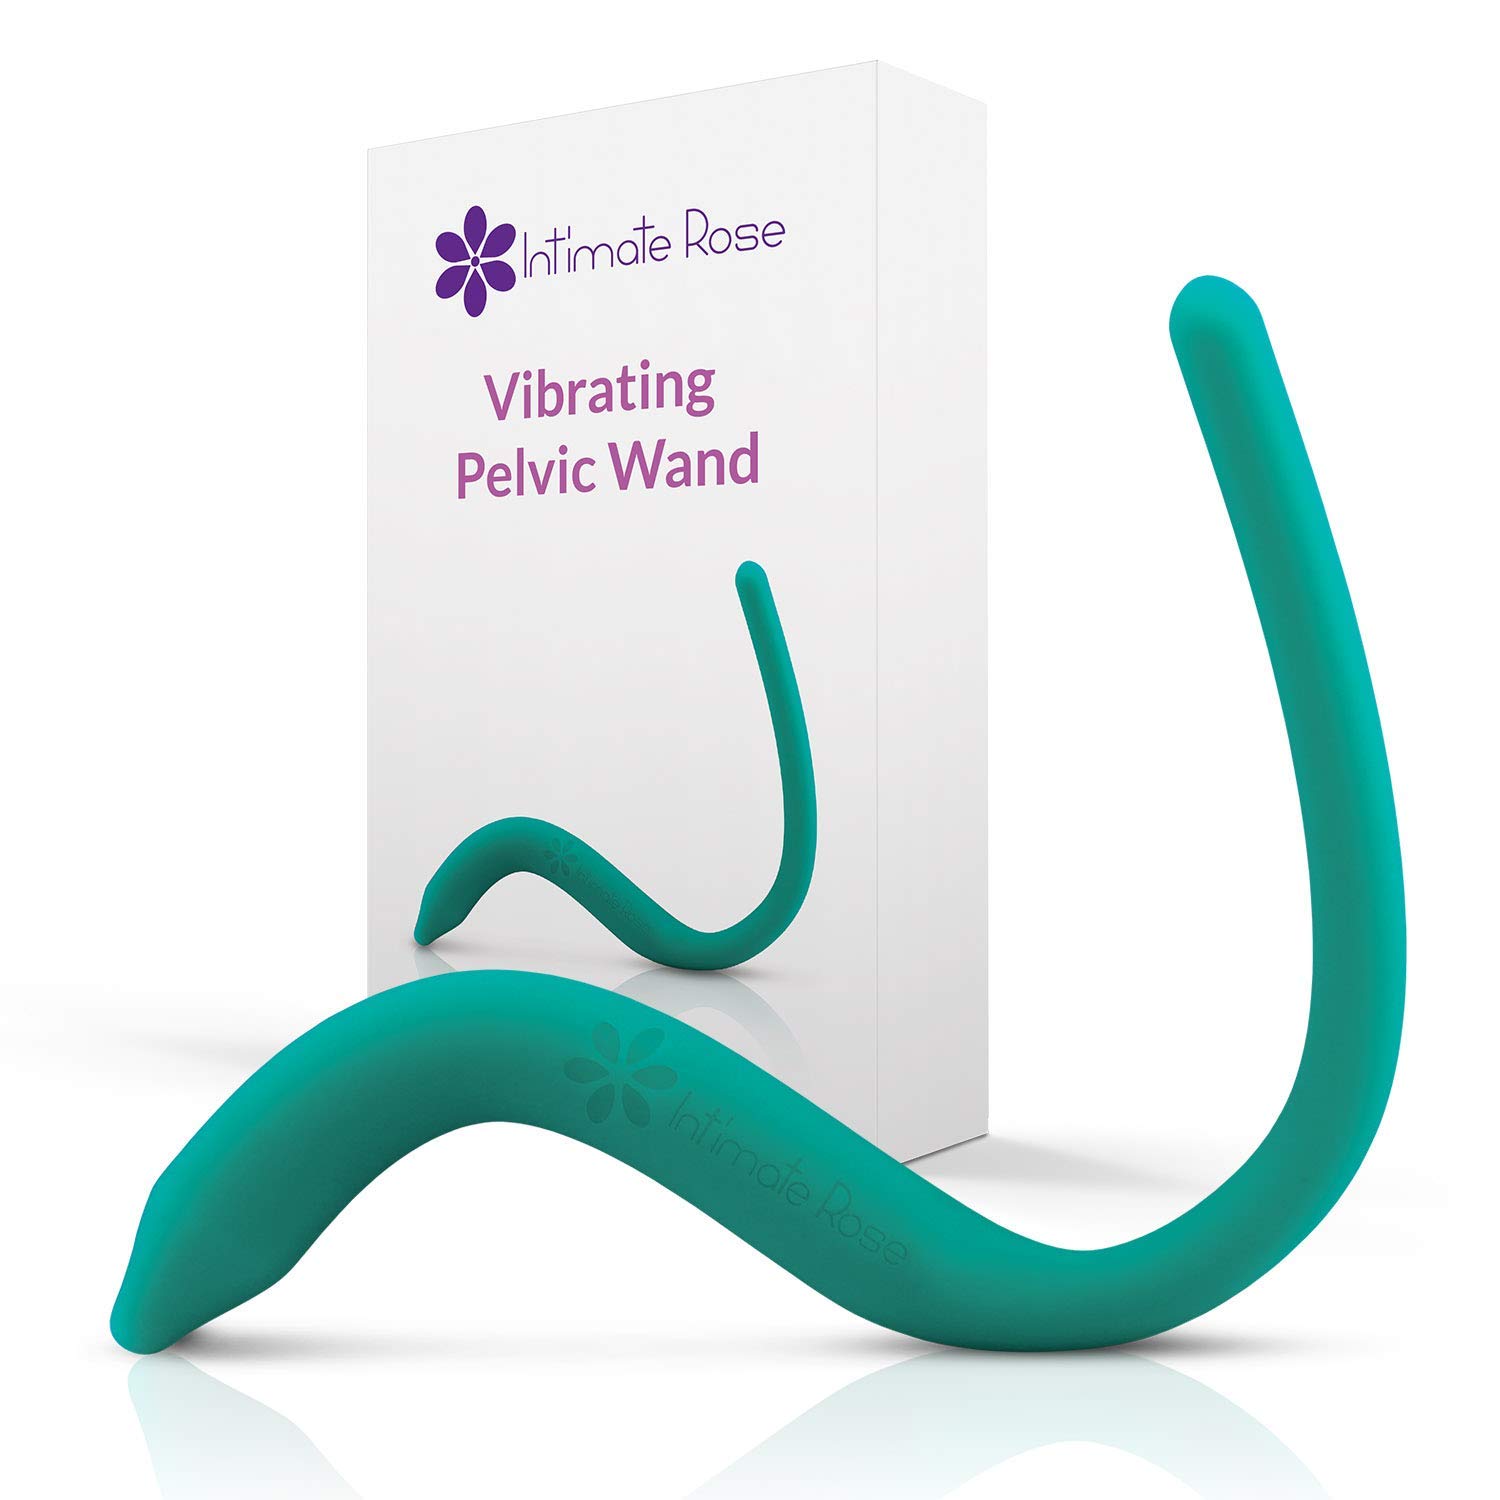 Intimate Rose Freeze Dried Aloe Vera Supplement with Added D-Mannose & Calcium Pelvic Wand with Vibration for Pelvic Muscle Pain Relief